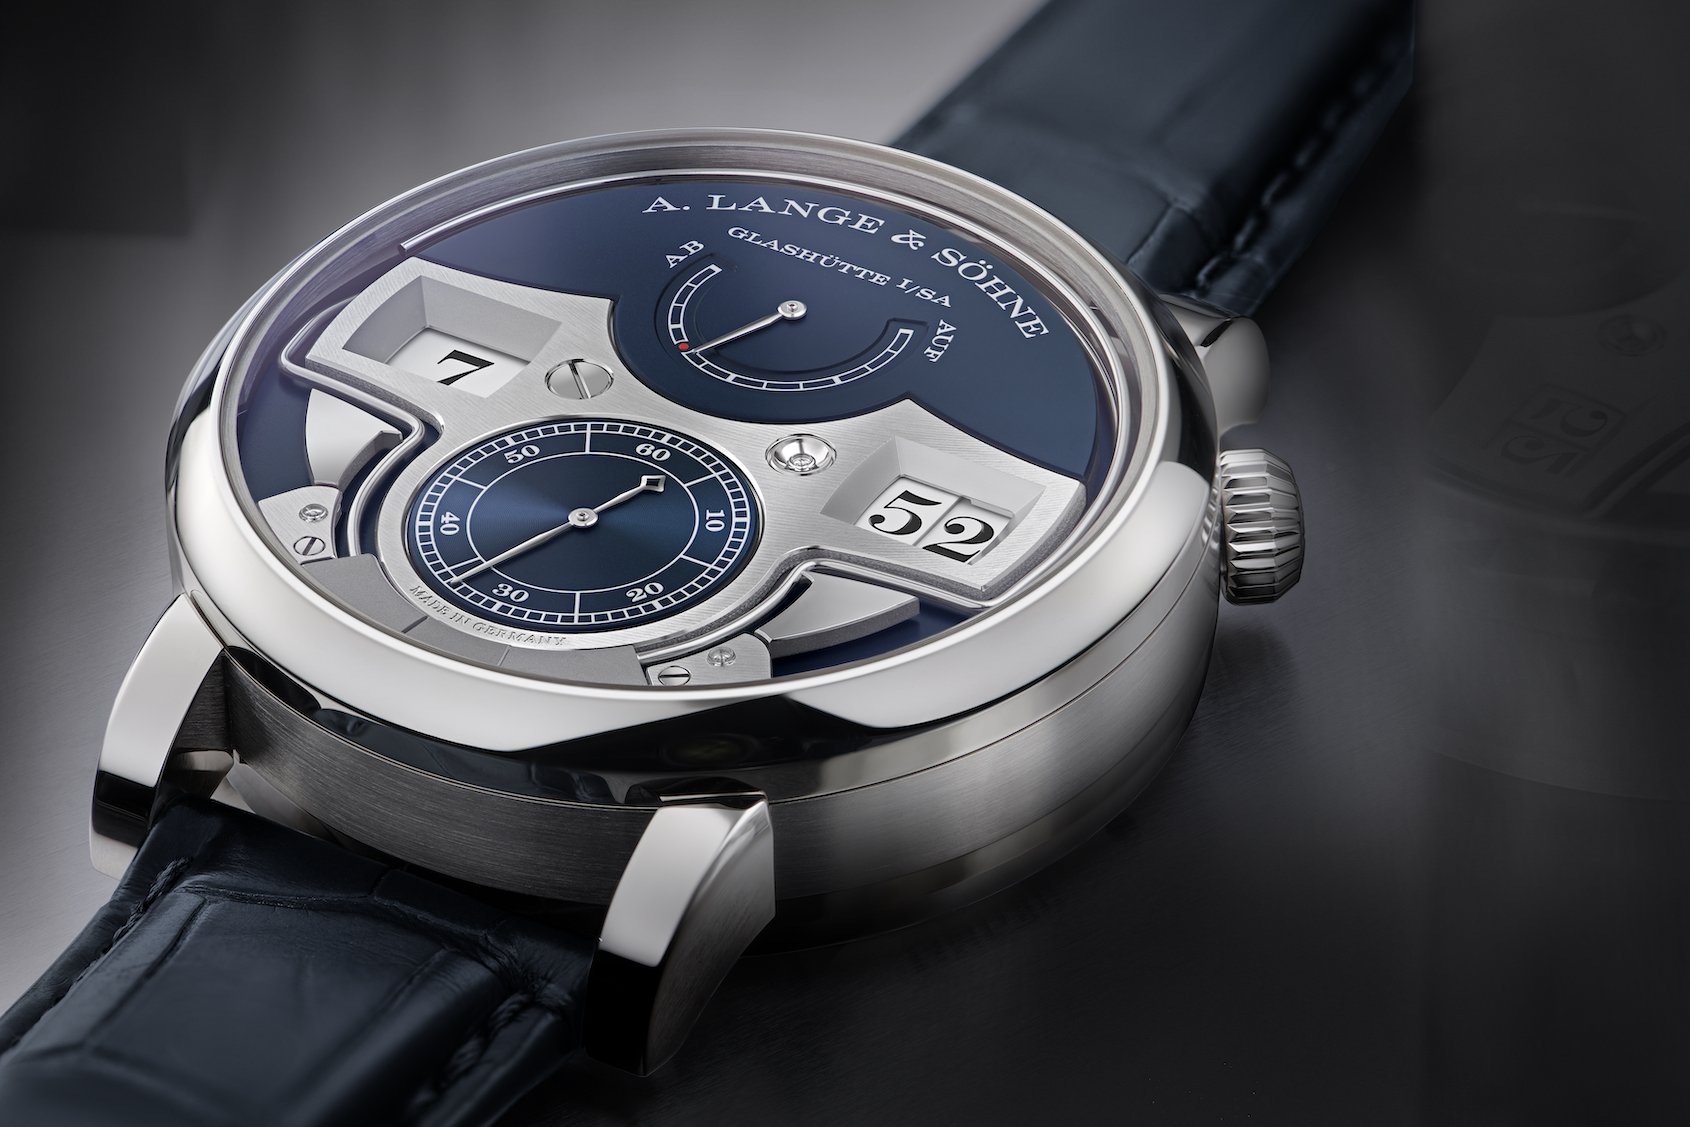 2020 A. Lange & Söhne collection